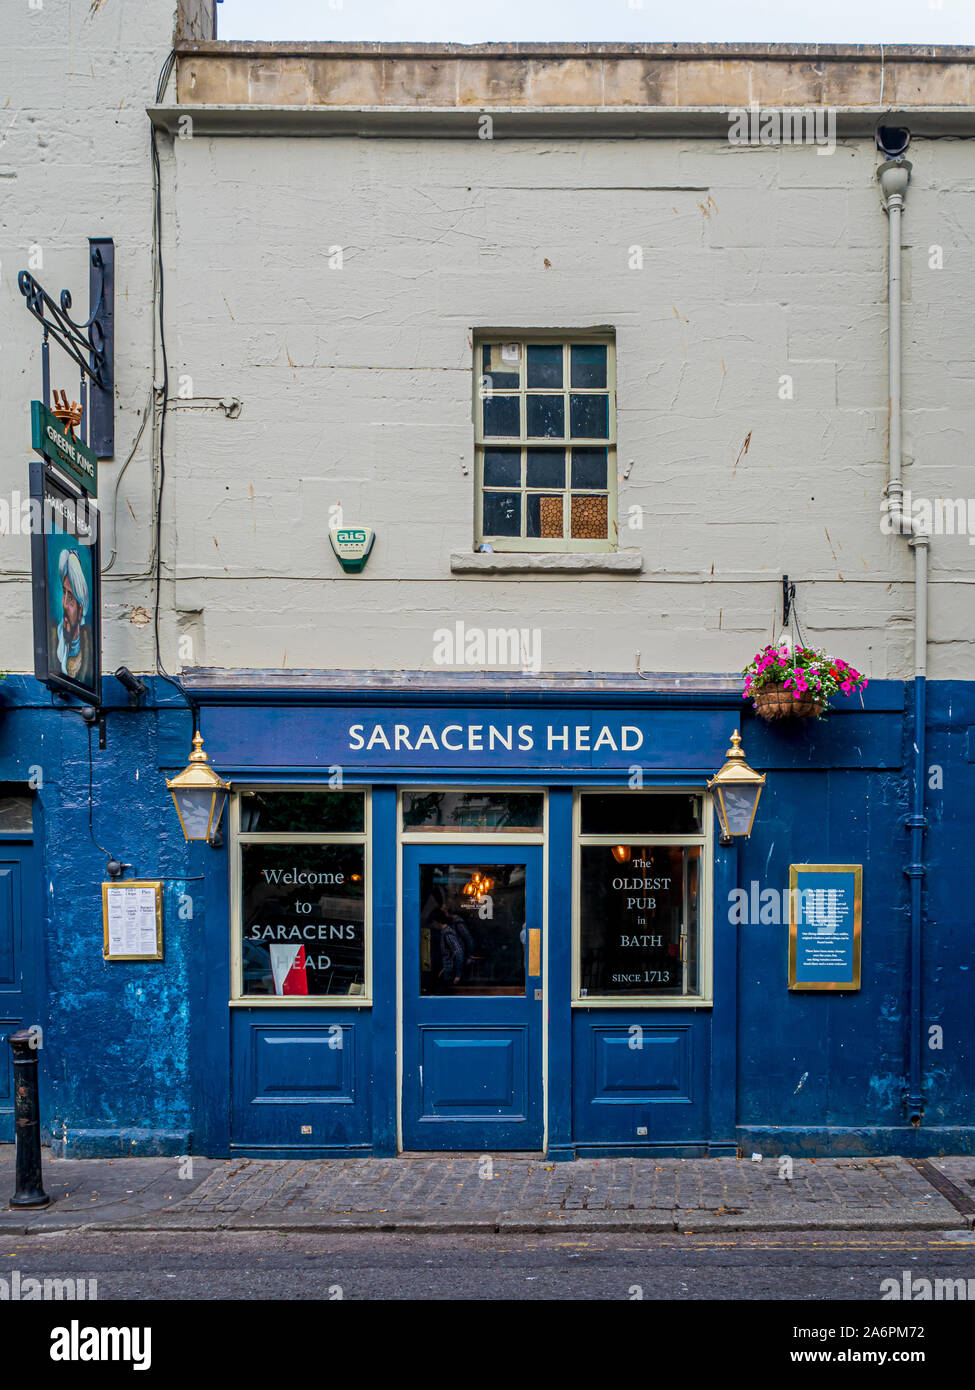 Saracens Head, the oldest pub in Bath built in 1713. Charles Dickens is reputed to have stayed here and written Pickwick Papers. Bath, Somerset. UK Stock Photo